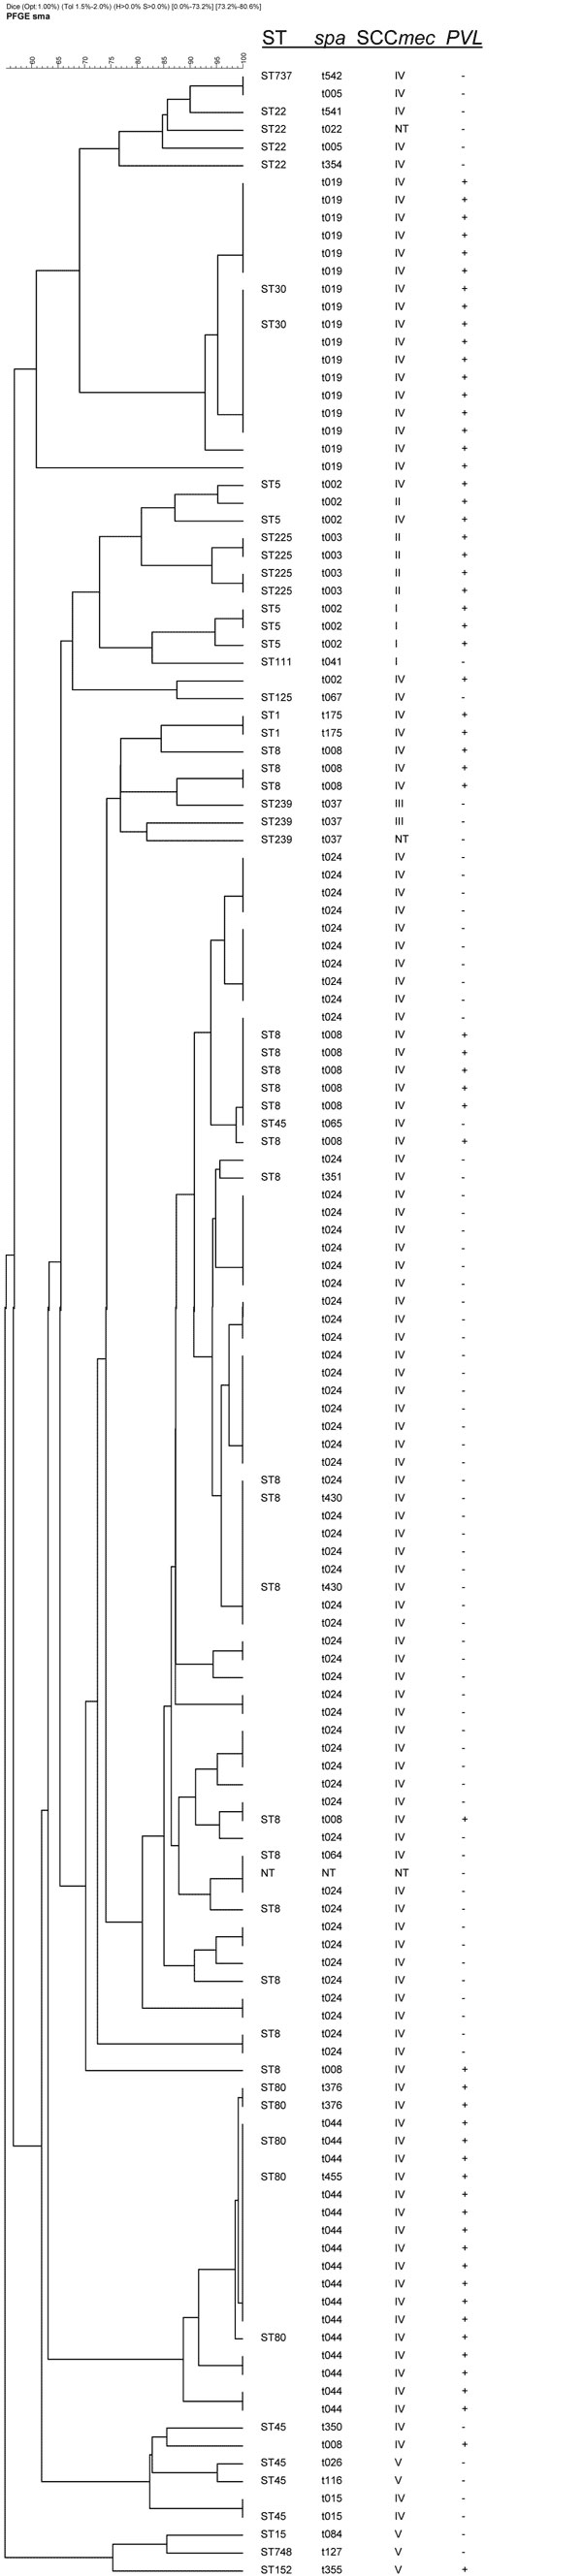 Cluster analysis by pulsed-field gel electrophoresis (PFGE). Data on spa type, staphylococcal chromosome cassette (SCC) mec type, Panton-Valentine leukocidin (PVL), and sequence type (ST) are included. Two isolates (t024 and t359) could not be typed by PFGE.